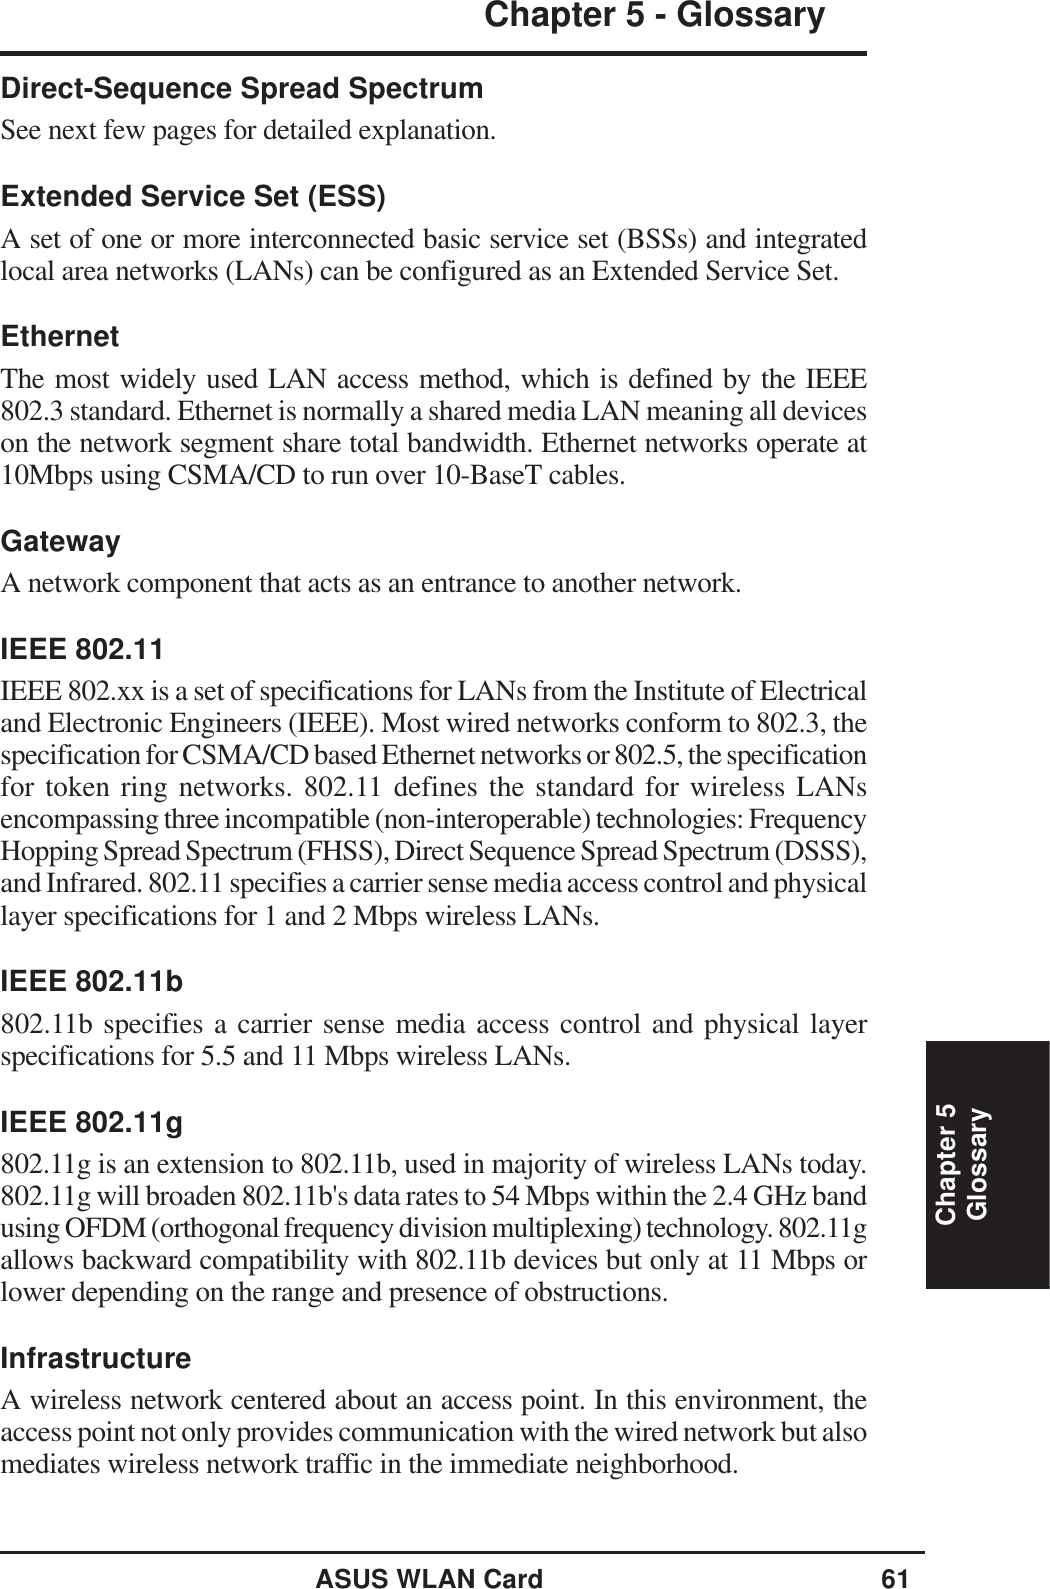 ASUS WLAN Card 61Chapter 5Chapter 5 - GlossaryGlossaryDirect-Sequence Spread SpectrumSee next few pages for detailed explanation.Extended Service Set (ESS)A set of one or more interconnected basic service set (BSSs) and integratedlocal area networks (LANs) can be configured as an Extended Service Set.EthernetThe most widely used LAN access method, which is defined by the IEEE802.3 standard. Ethernet is normally a shared media LAN meaning all deviceson the network segment share total bandwidth. Ethernet networks operate at10Mbps using CSMA/CD to run over 10-BaseT cables.GatewayA network component that acts as an entrance to another network.IEEE 802.11IEEE 802.xx is a set of specifications for LANs from the Institute of Electricaland Electronic Engineers (IEEE). Most wired networks conform to 802.3, thespecification for CSMA/CD based Ethernet networks or 802.5, the specificationfor token ring networks. 802.11 defines the standard for wireless LANsencompassing three incompatible (non-interoperable) technologies: FrequencyHopping Spread Spectrum (FHSS), Direct Sequence Spread Spectrum (DSSS),and Infrared. 802.11 specifies a carrier sense media access control and physicallayer specifications for 1 and 2 Mbps wireless LANs.IEEE 802.11b802.11b specifies a carrier sense media access control and physical layerspecifications for 5.5 and 11 Mbps wireless LANs.IEEE 802.11g802.11g is an extension to 802.11b, used in majority of wireless LANs today.802.11g will broaden 802.11b&apos;s data rates to 54 Mbps within the 2.4 GHz bandusing OFDM (orthogonal frequency division multiplexing) technology. 802.11gallows backward compatibility with 802.11b devices but only at 11 Mbps orlower depending on the range and presence of obstructions.InfrastructureA wireless network centered about an access point. In this environment, theaccess point not only provides communication with the wired network but alsomediates wireless network traffic in the immediate neighborhood.